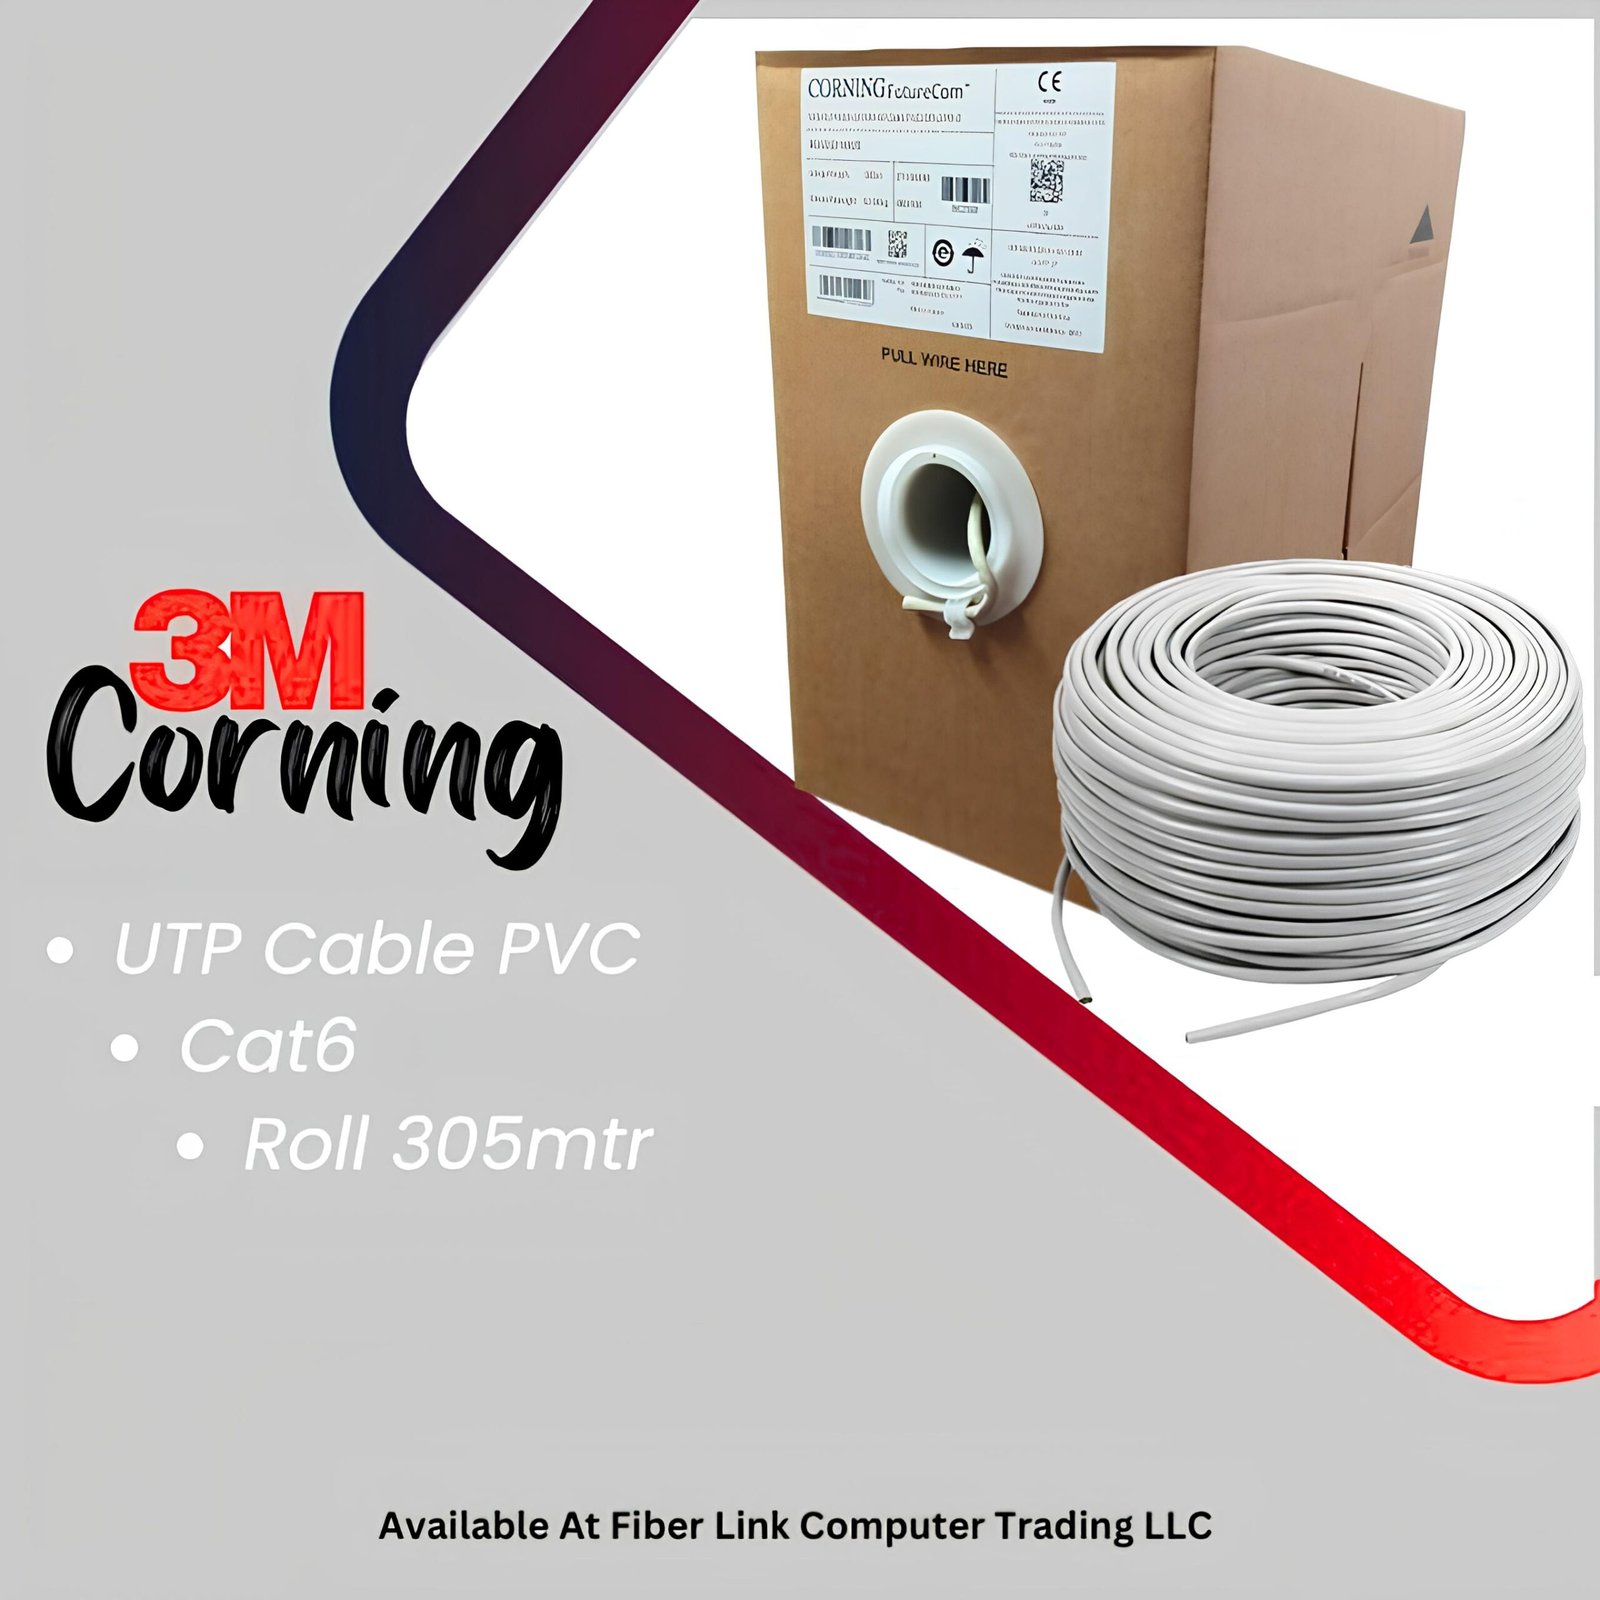 Top 3M Corning CAT6 Cable Suppliers in UAE: Your Ultimate Guide to Quality and Value